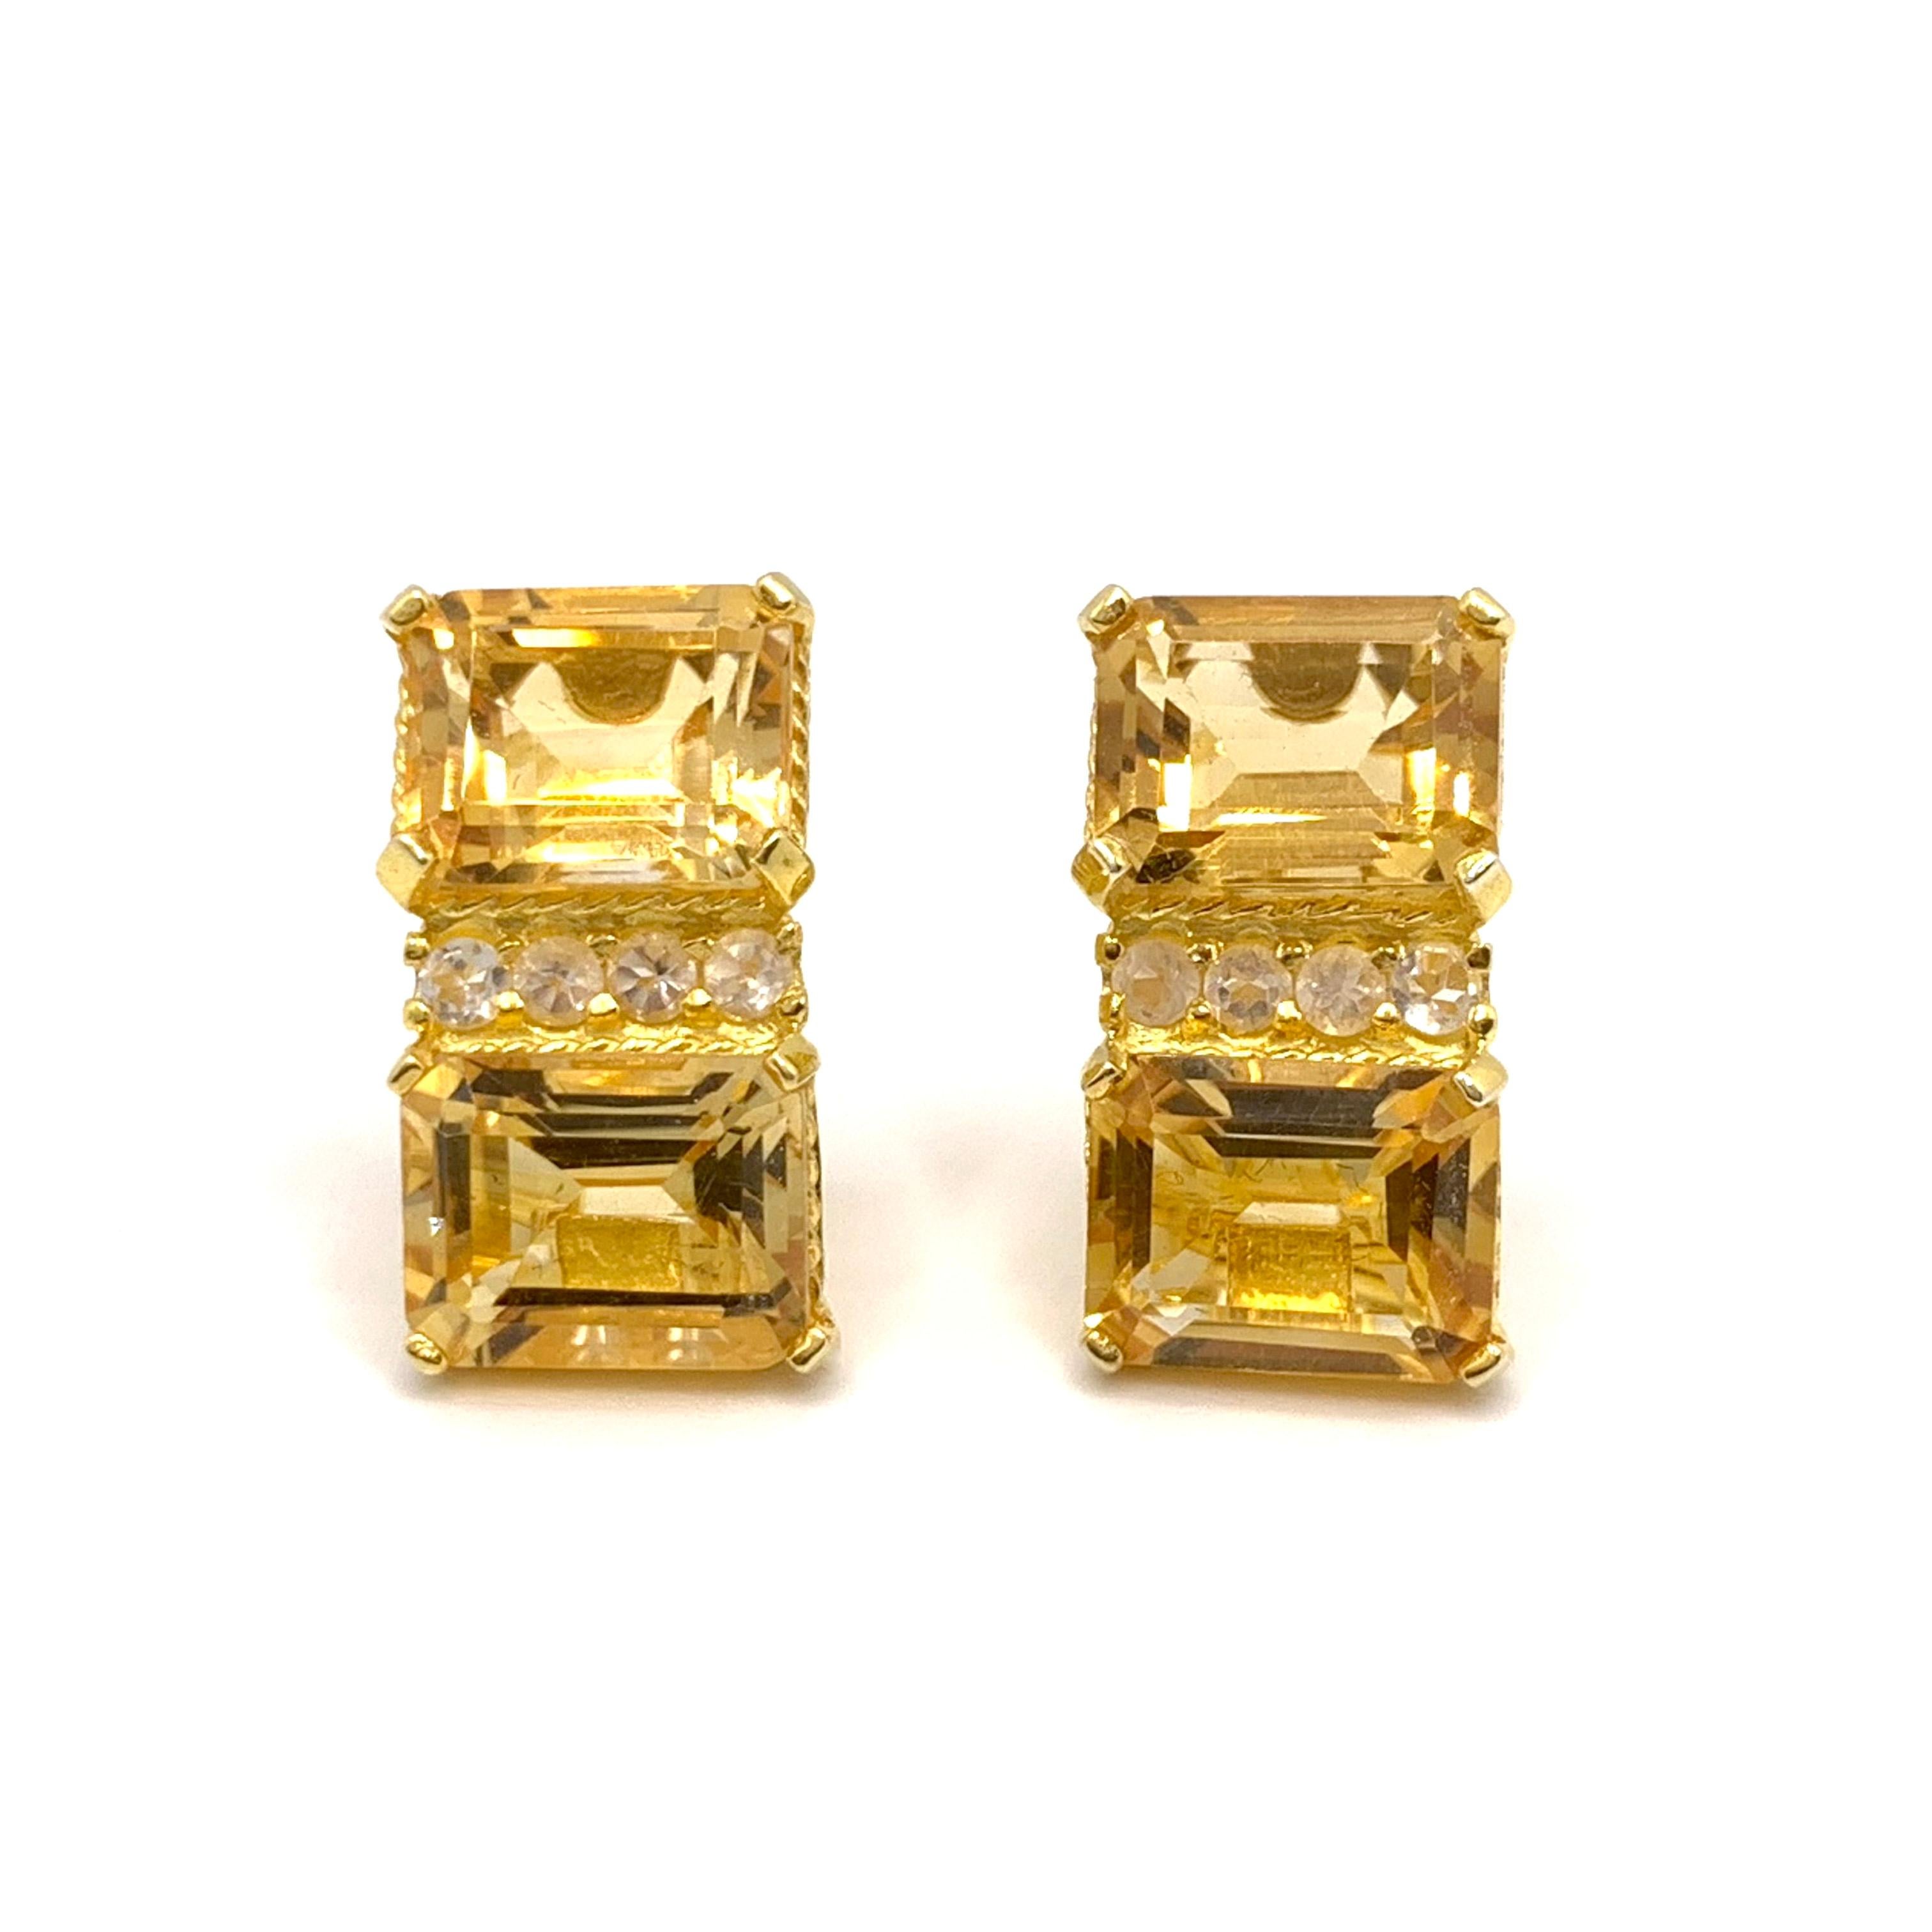 These stunning pair of earrings features a set of genuine emerald-cut Brazilian Citrine adorned with round white topaz, handset in 18k yellow gold vermeil over sterling silver. The facets from emerald cut stones offer beautiful shiny and sparkle